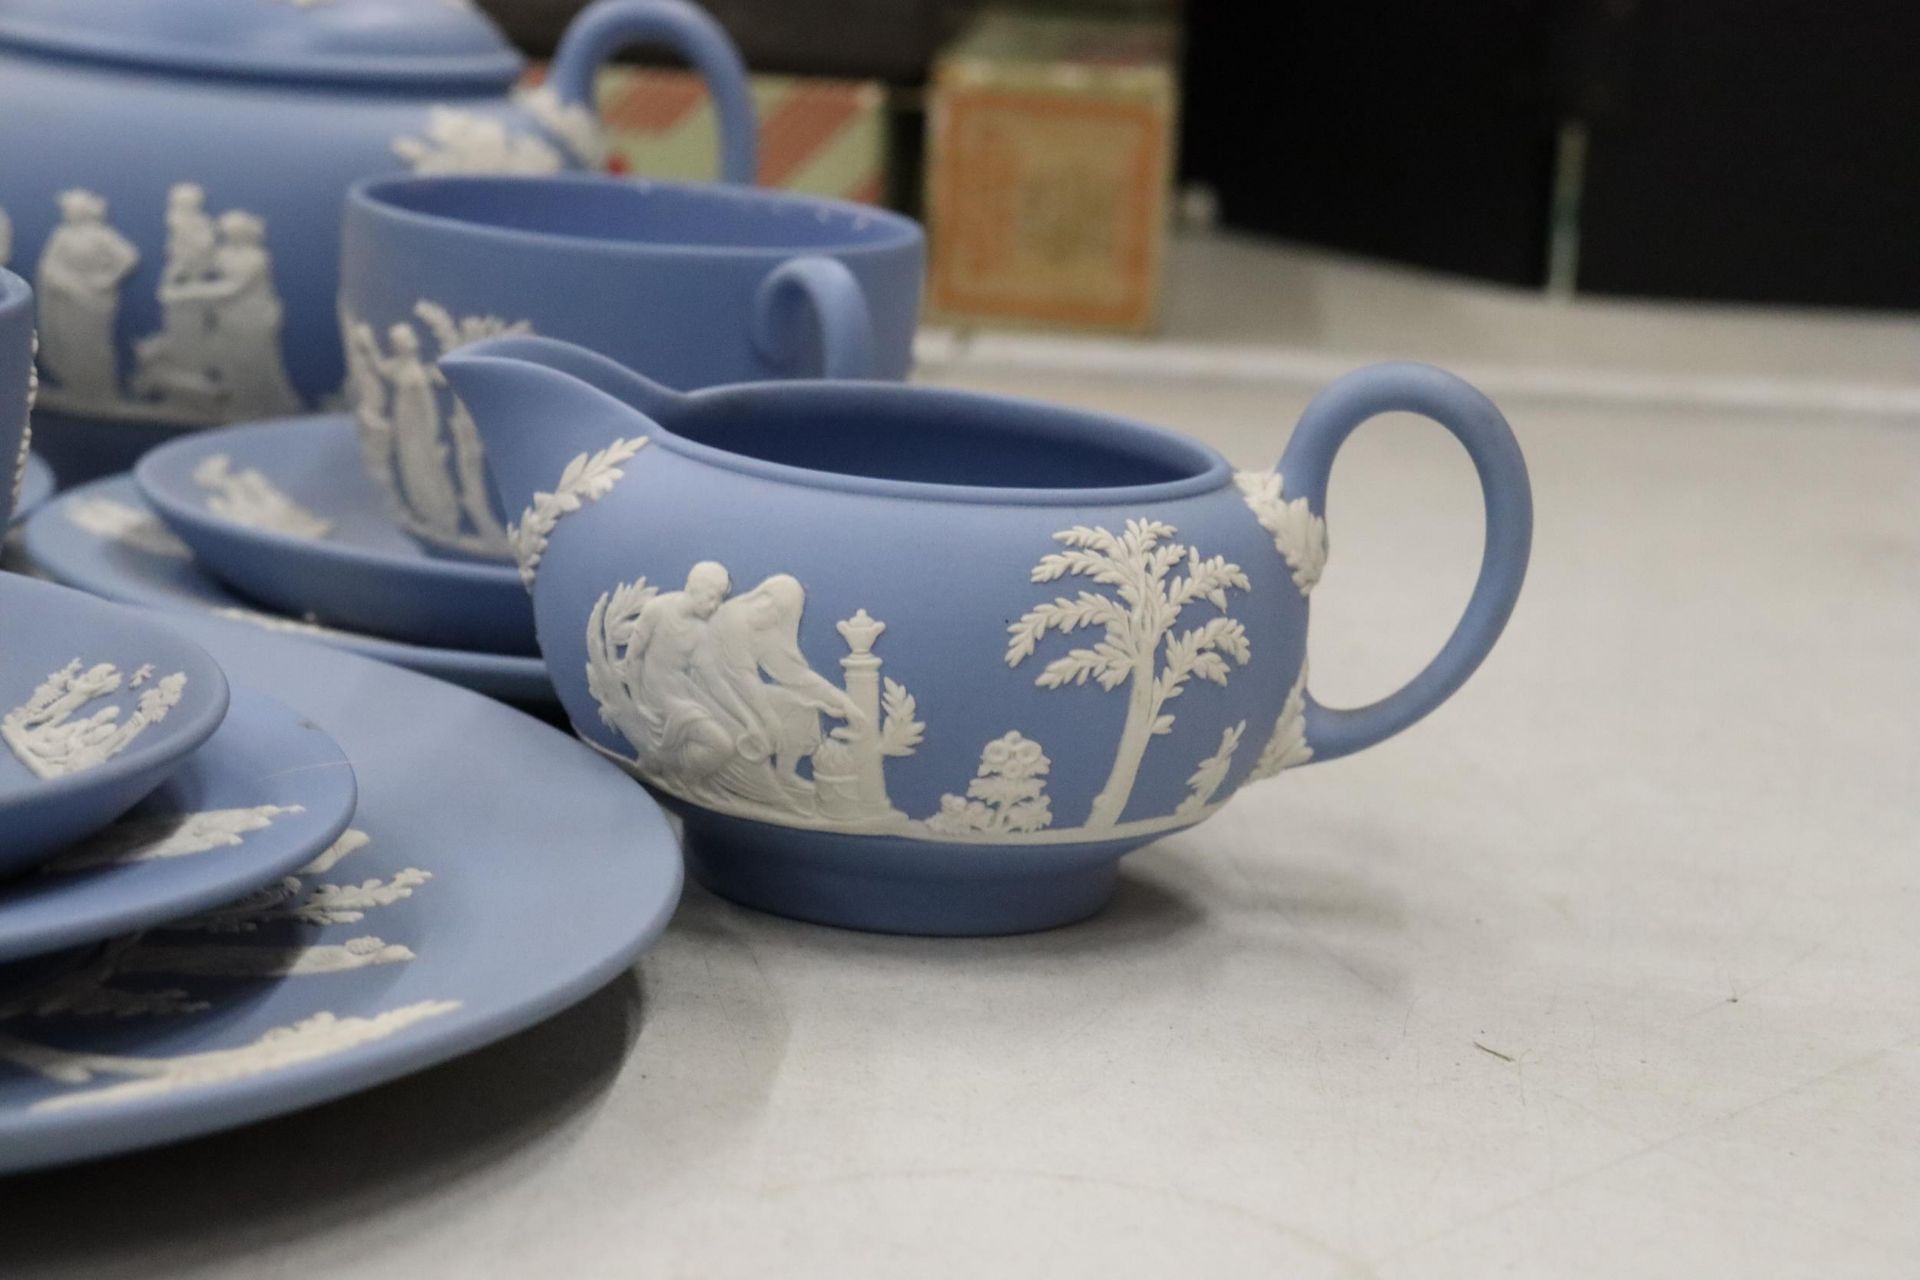 A WEDGWOOD JASPERWARE TEASET TO INCLUDE A TEAPOT, CREAM JUG, SUGAR BOWL,CUPS, SAUCERS, SIDE PLATES - Image 3 of 8